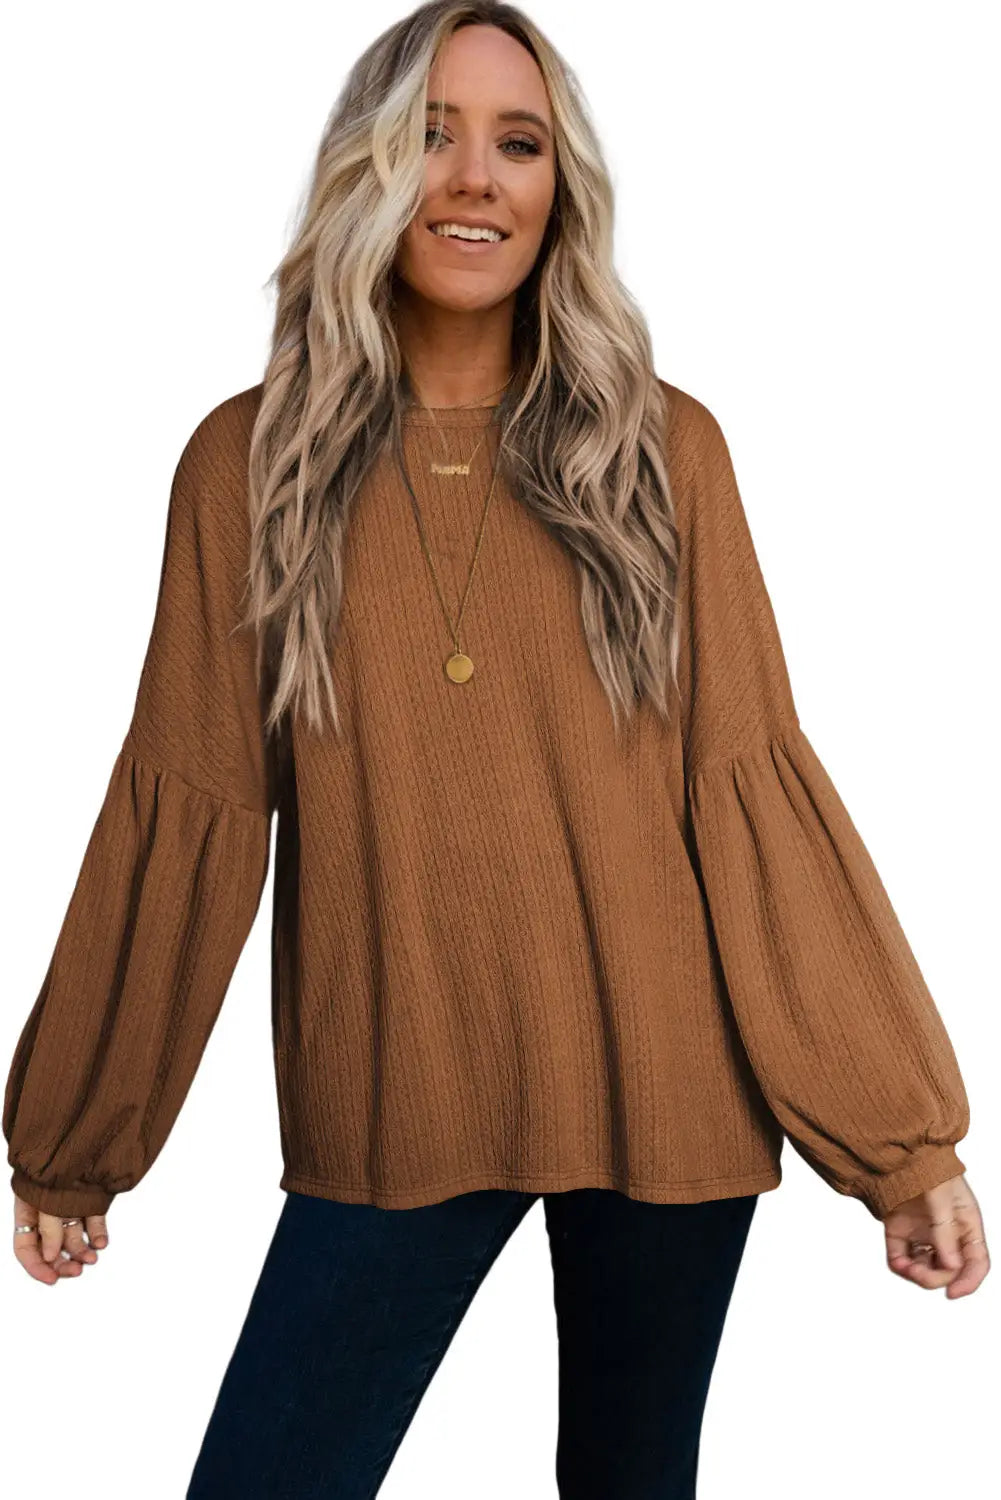 Faux knit jacquard puffy long sleeve top - tops